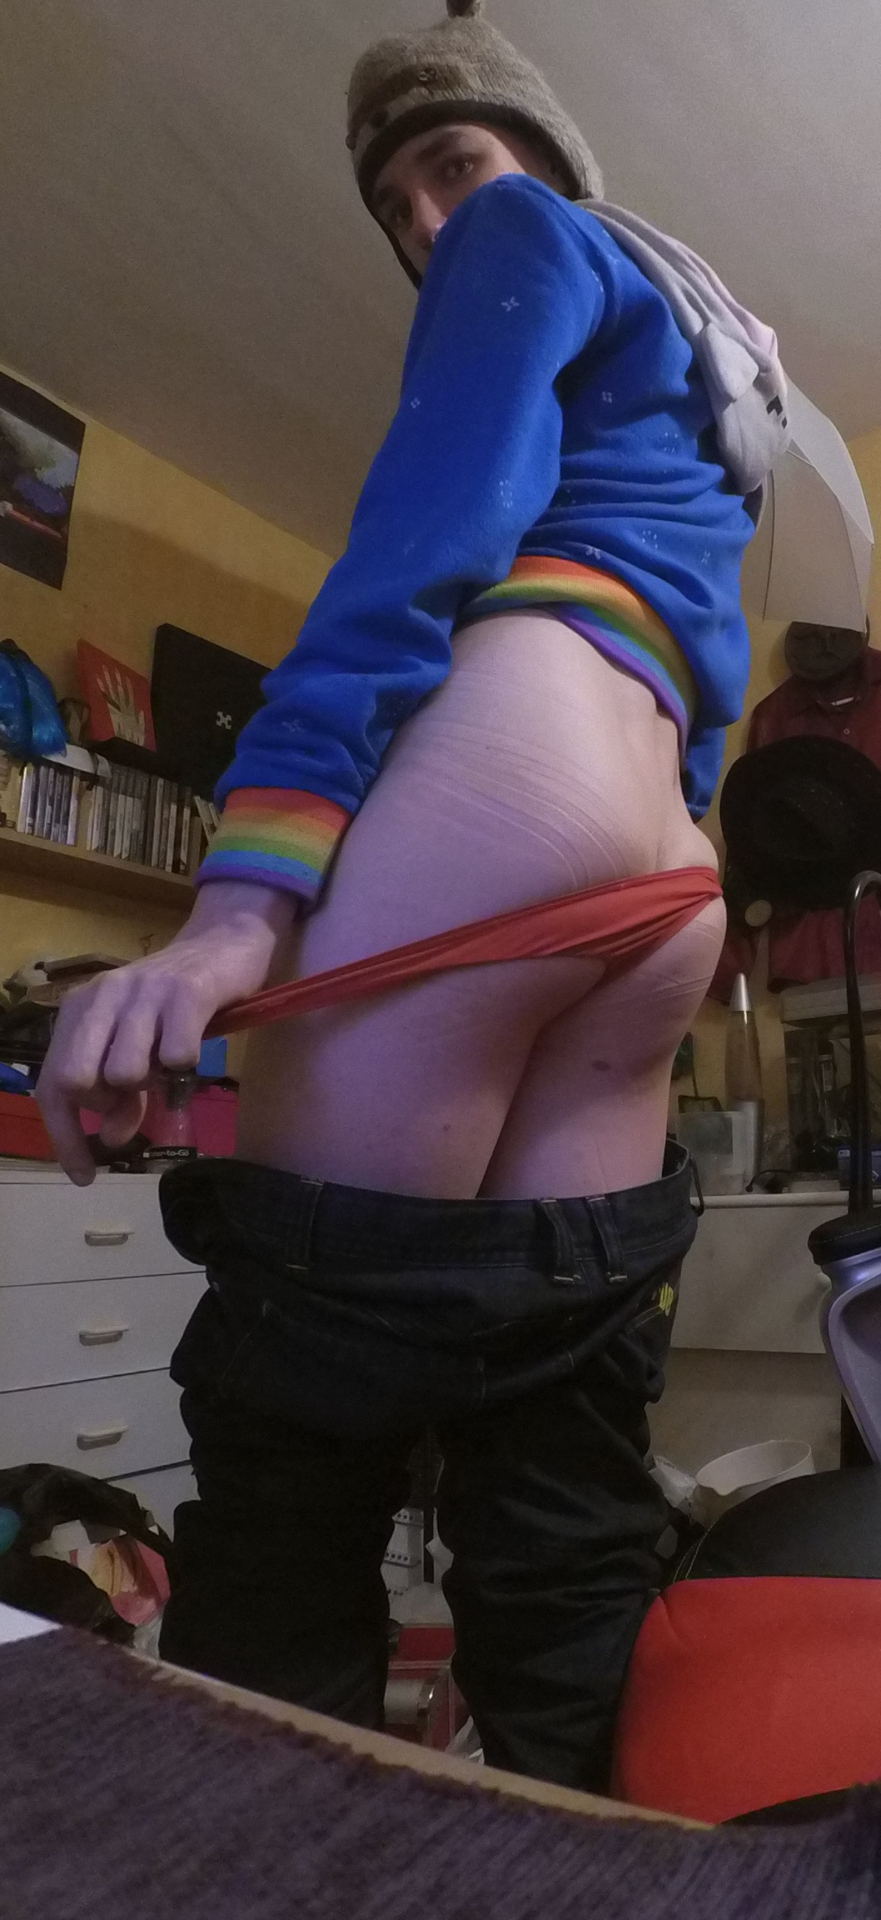 More pictures for the boyfriend. Excuse the lines on my butt - I was sitting on a